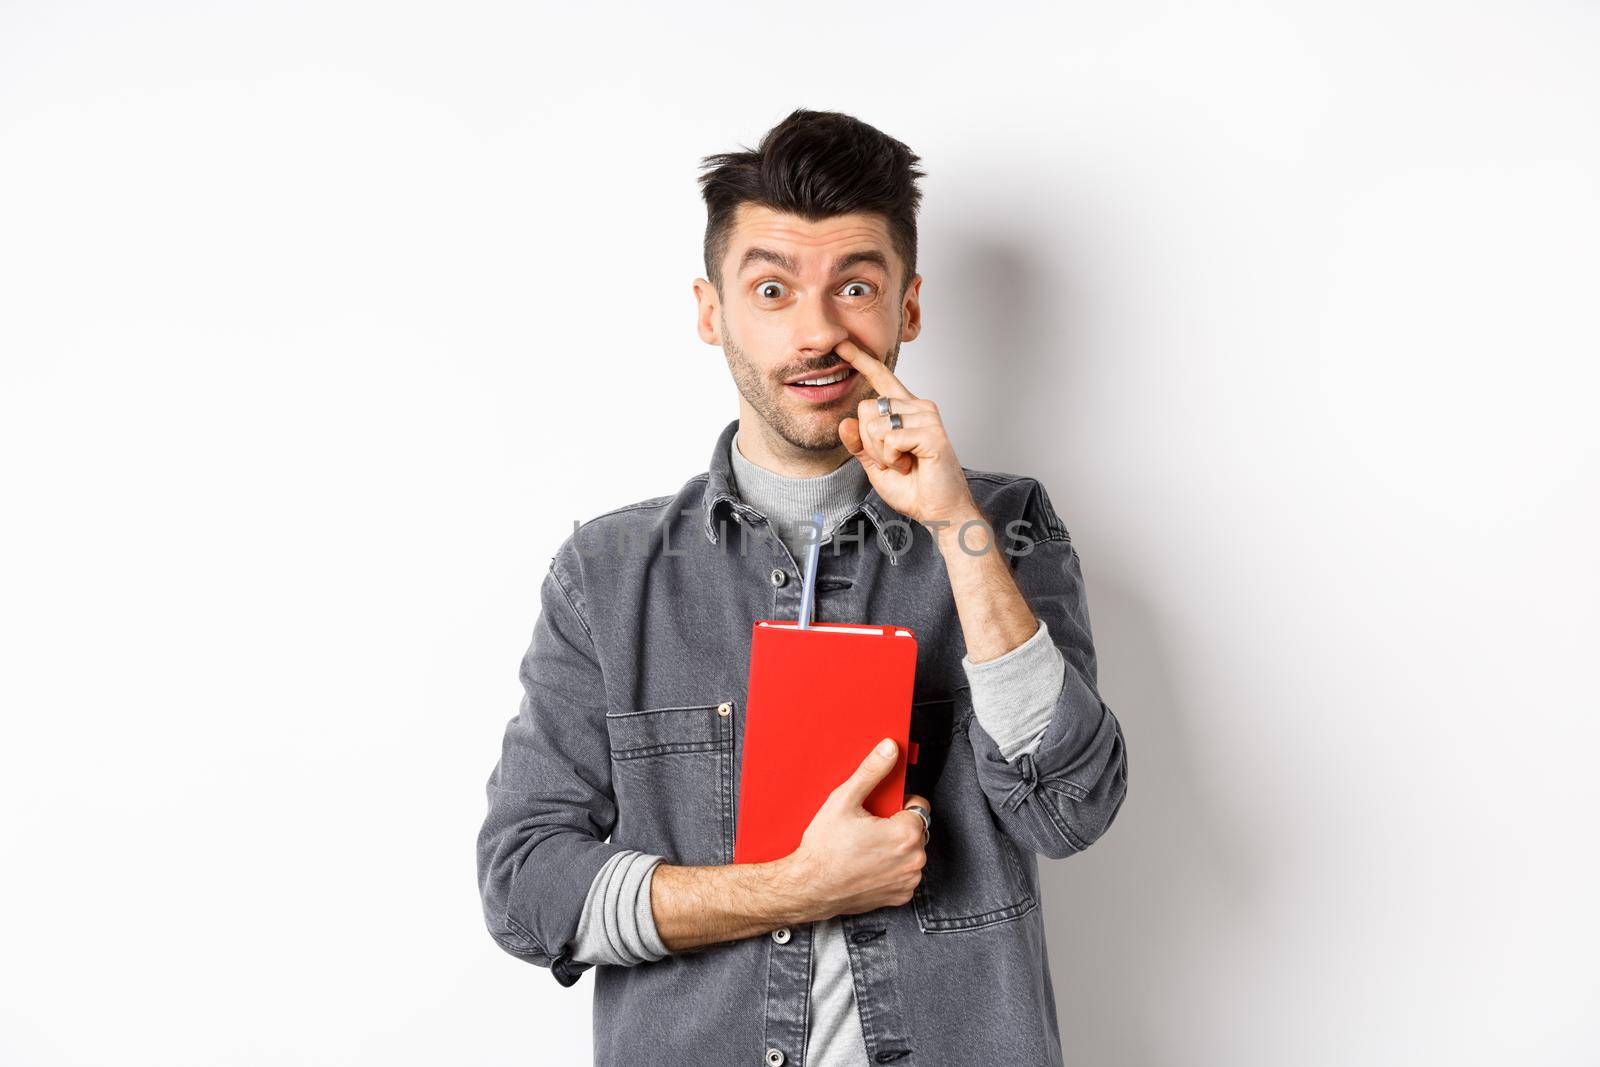 Young guy picking nose and holding book, look stupid at camera, standing against white background.